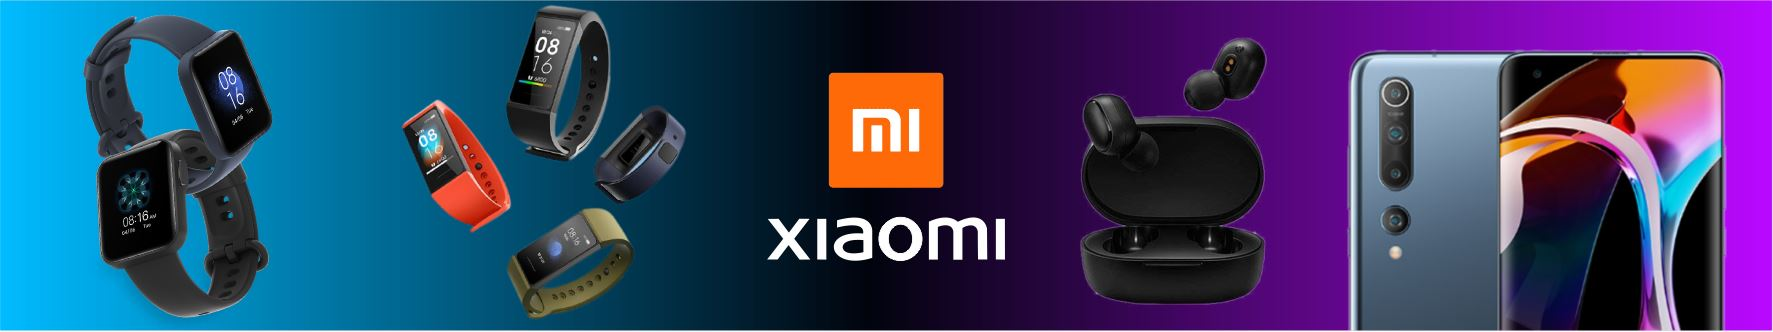 Describe the reasons of trading short put stock options of Xiaomi, and share the advantages and disadvantages of this strategy.